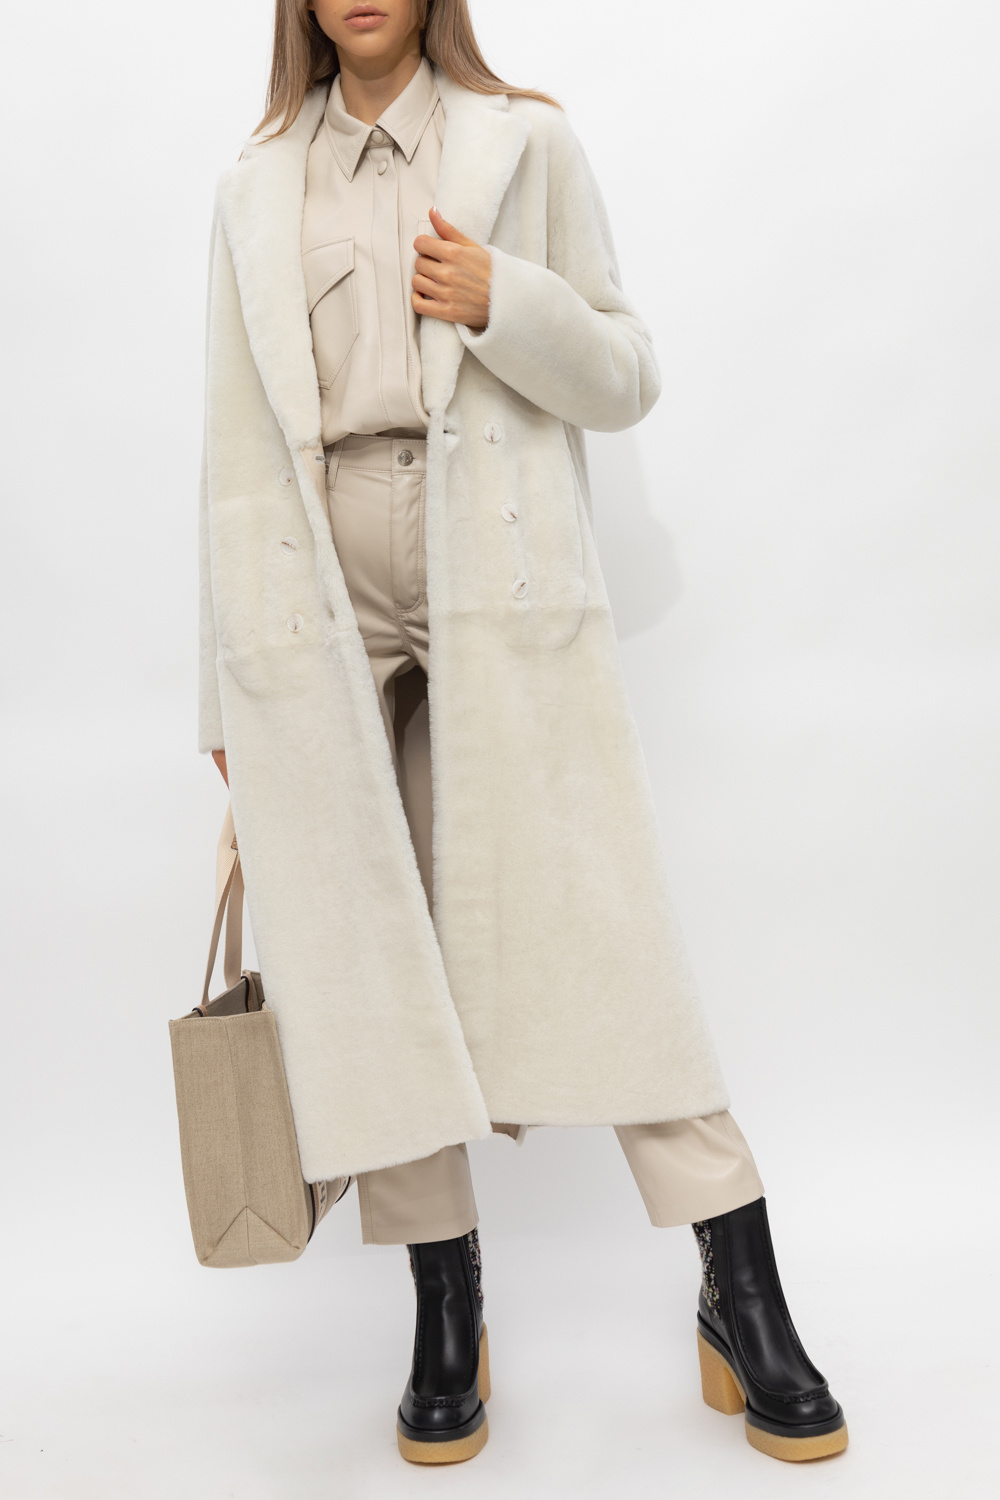 Stay one step ahead and see the most stylish suggestions ‘Lambert’ shearling coat